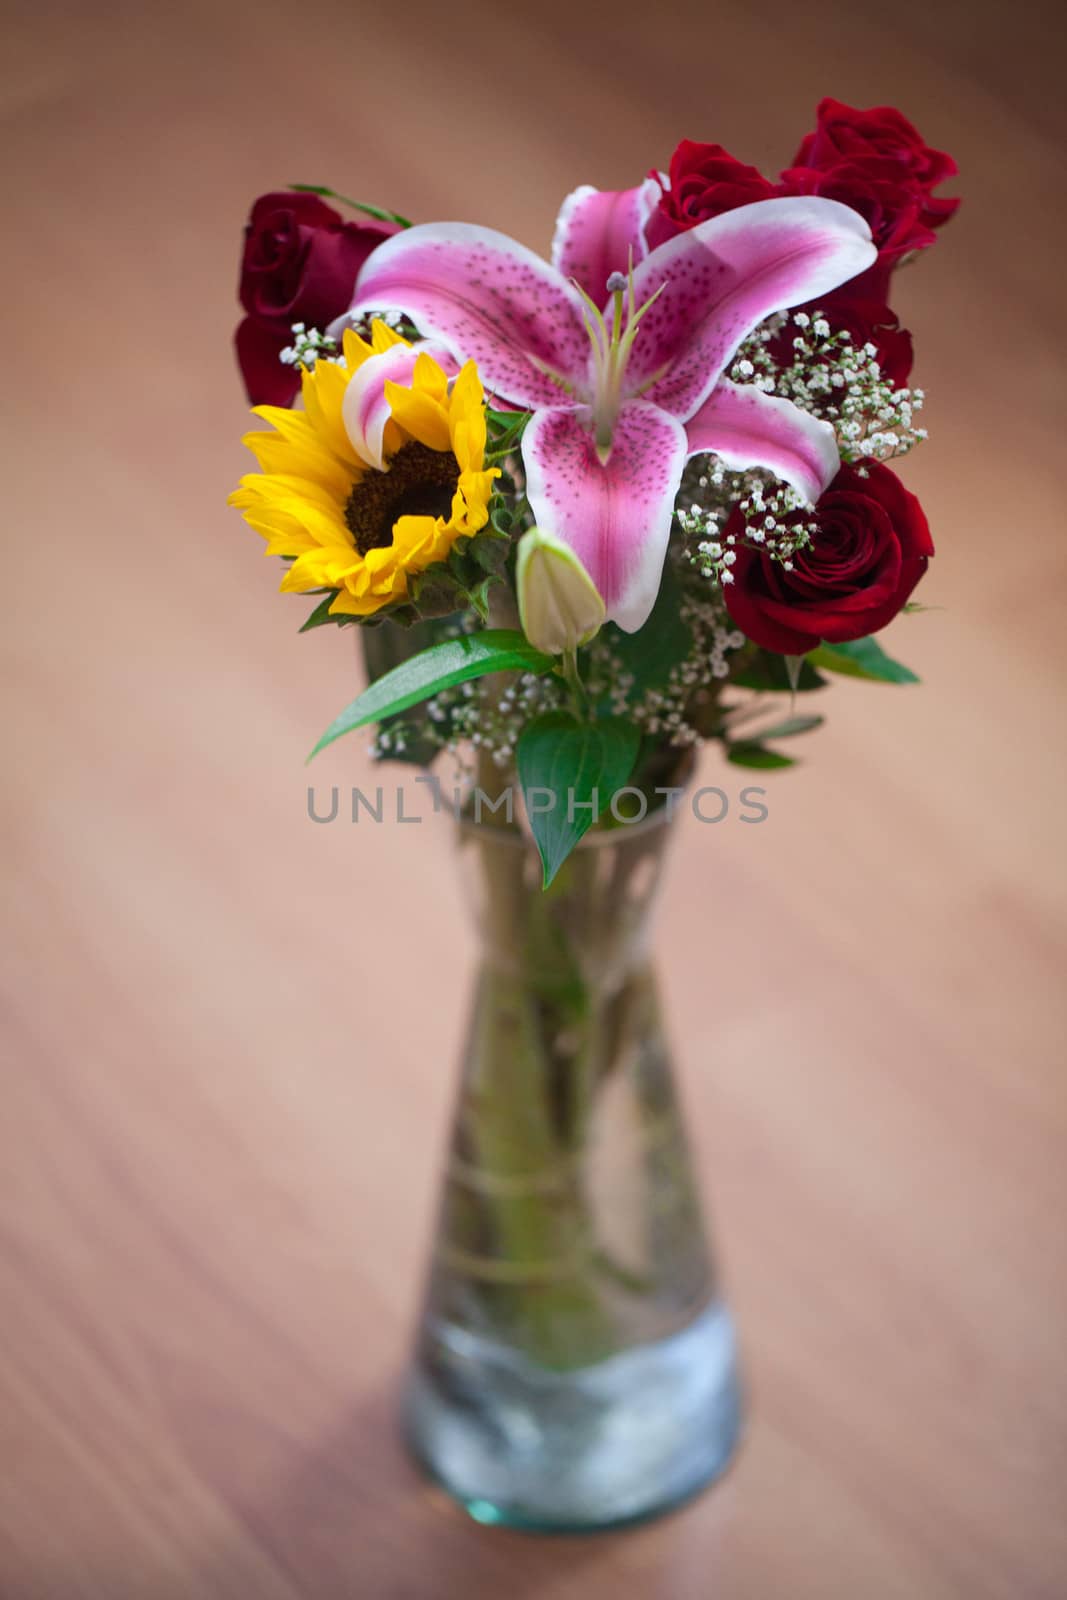 beautiful bouquet of sunflowers, lily and roses in a vase by jannyjus